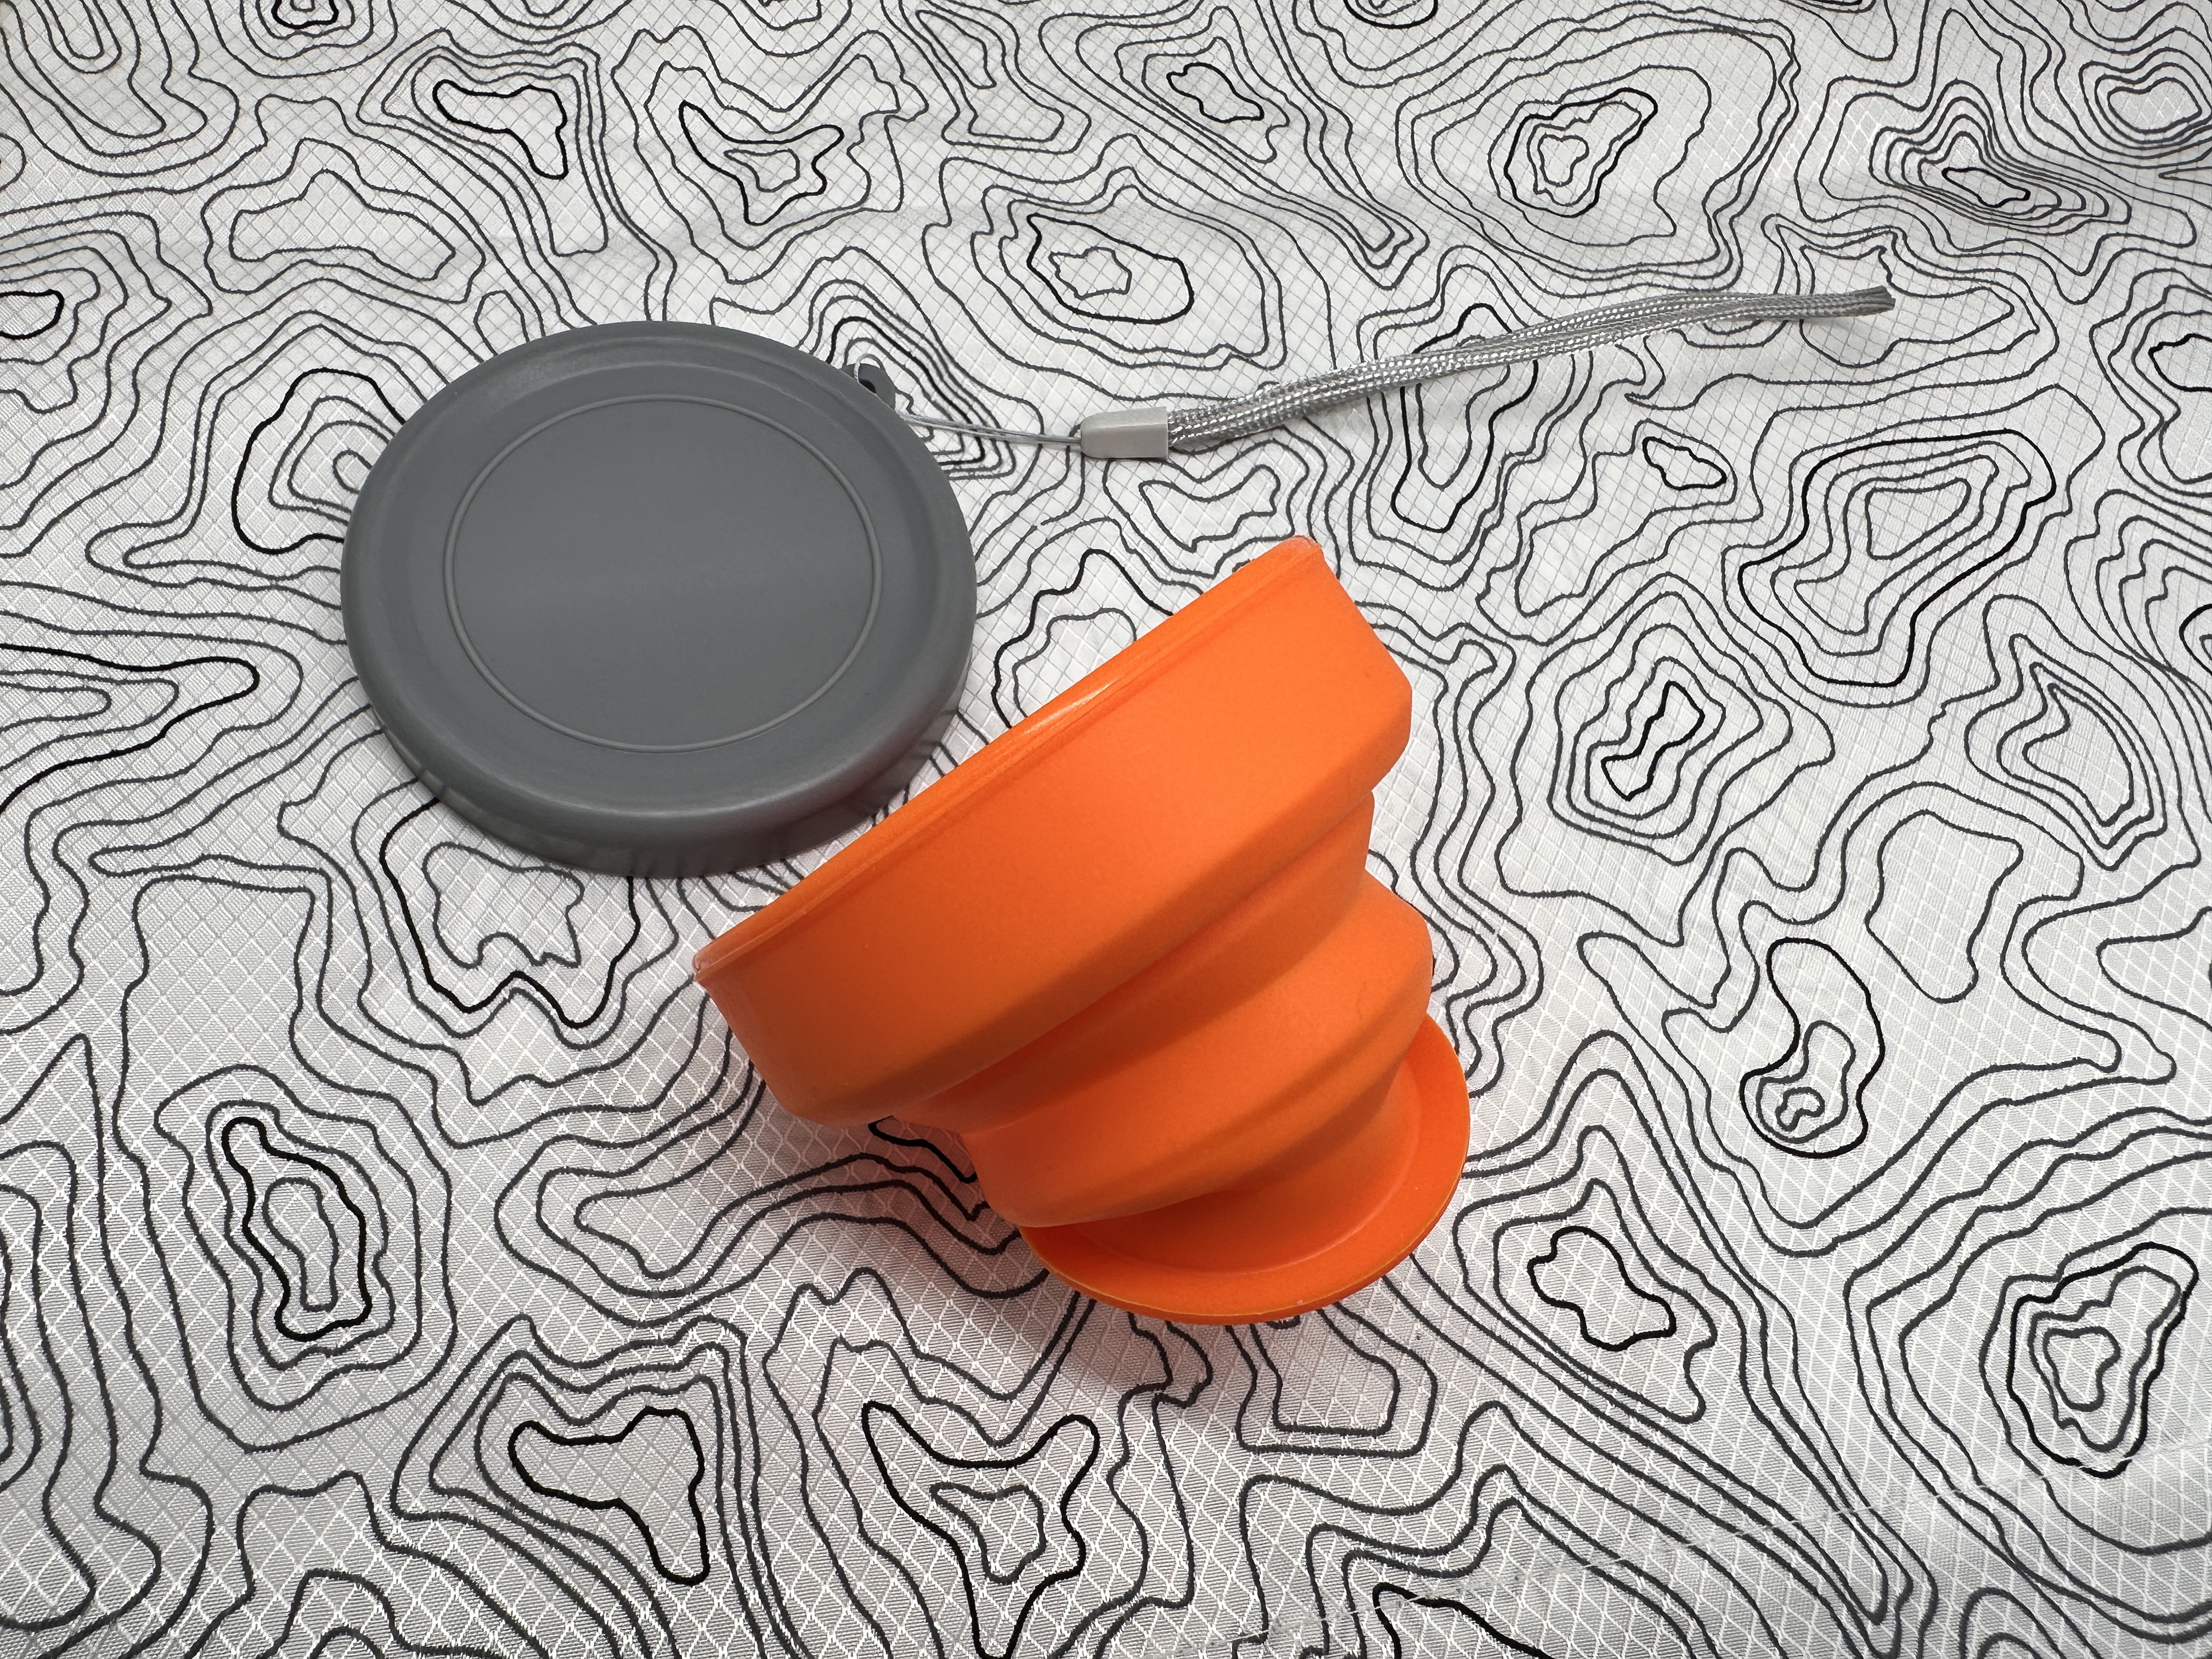 Sip N Squish Collapsible Cup